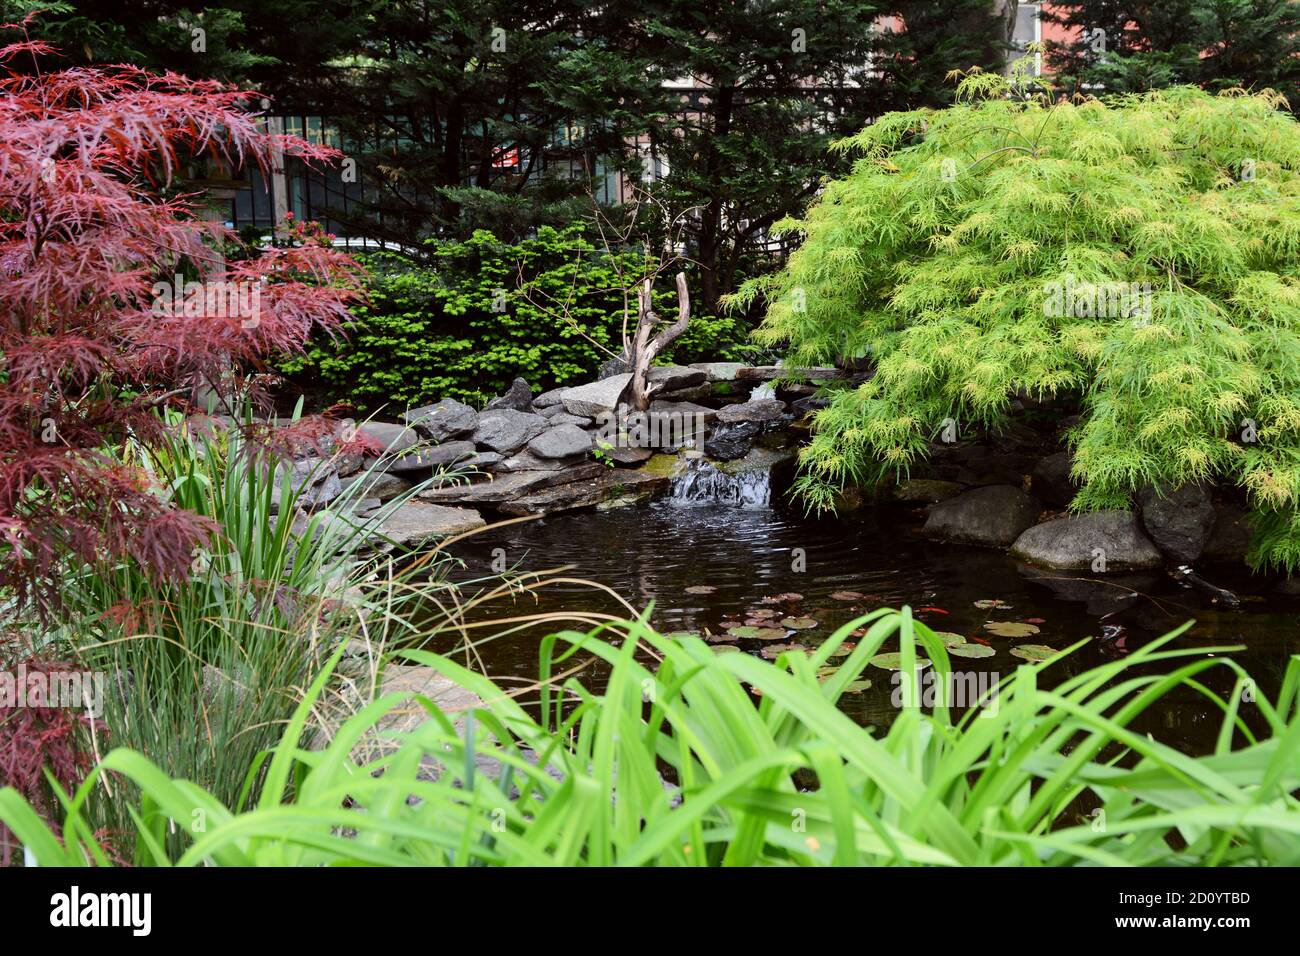 Small lily pond in Jefferson Market Garden, New York City. Water flows down a rock waterfall among Japanese maples and lush shrubbery in the urban gar Stock Photo